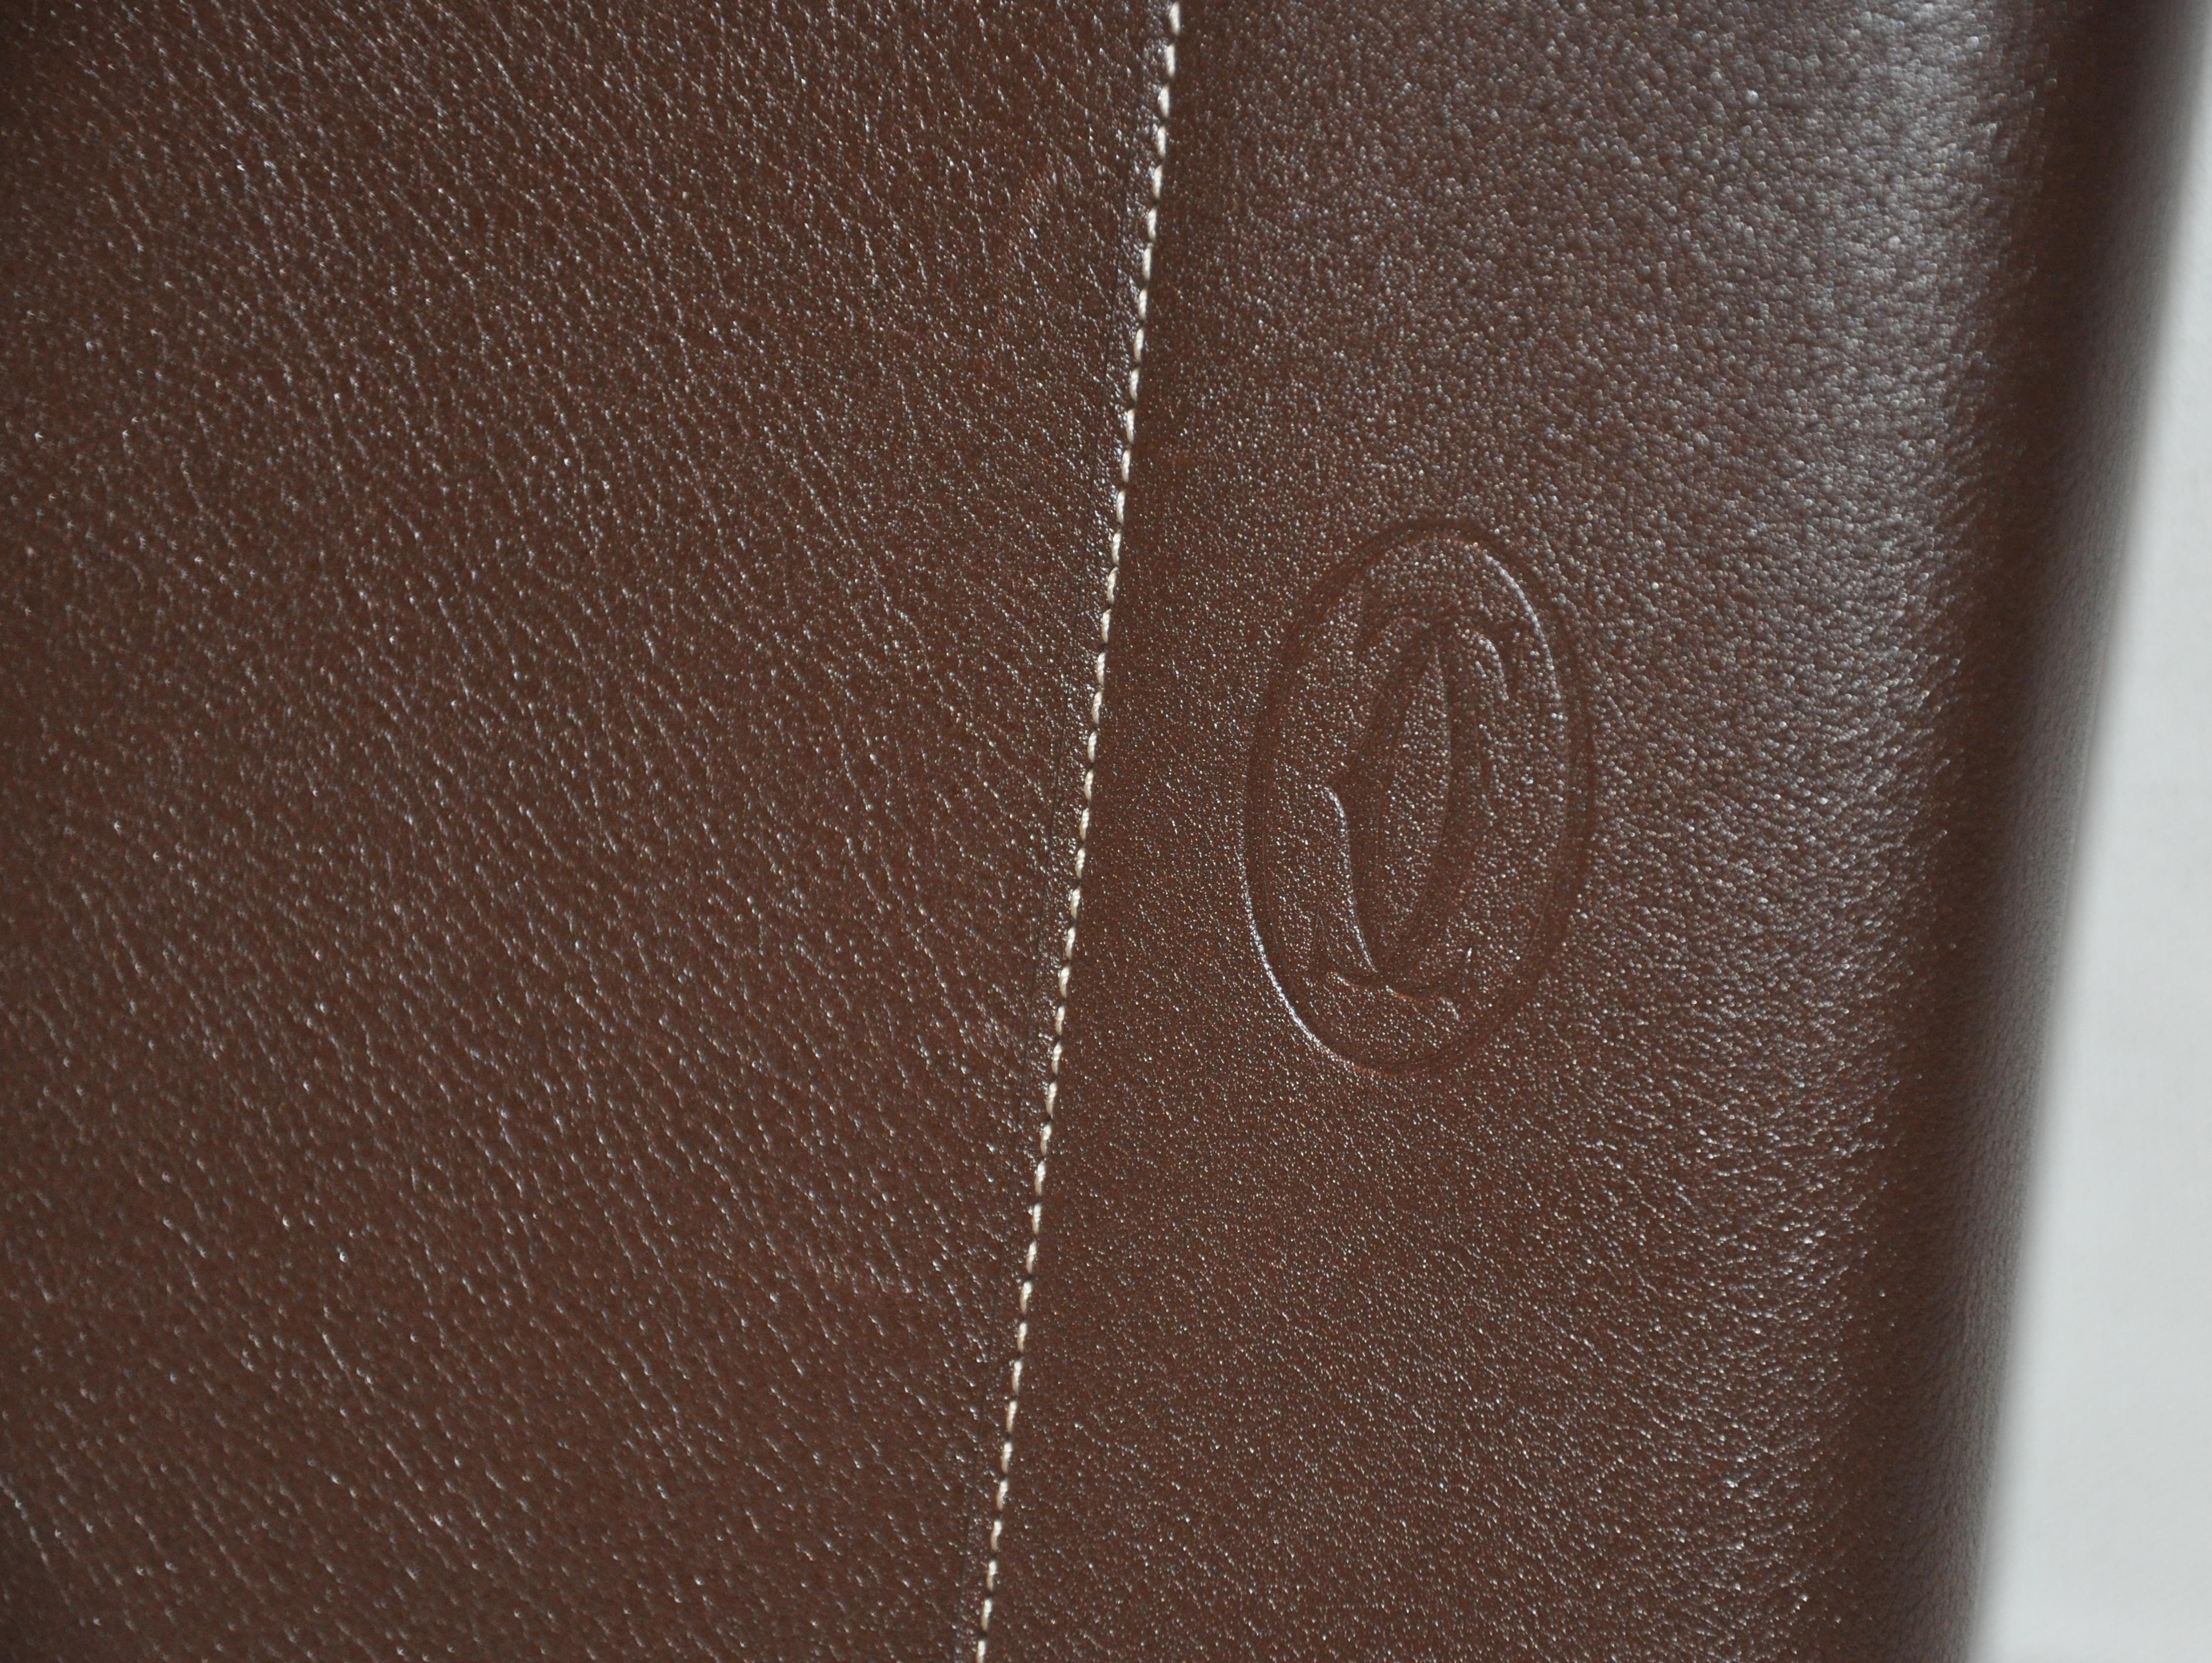        Cartier wonderful signature textured coco-brown calfskin covered notebook detailed with their signature monogram on the exterior cover. The interior's right corner has their signature 